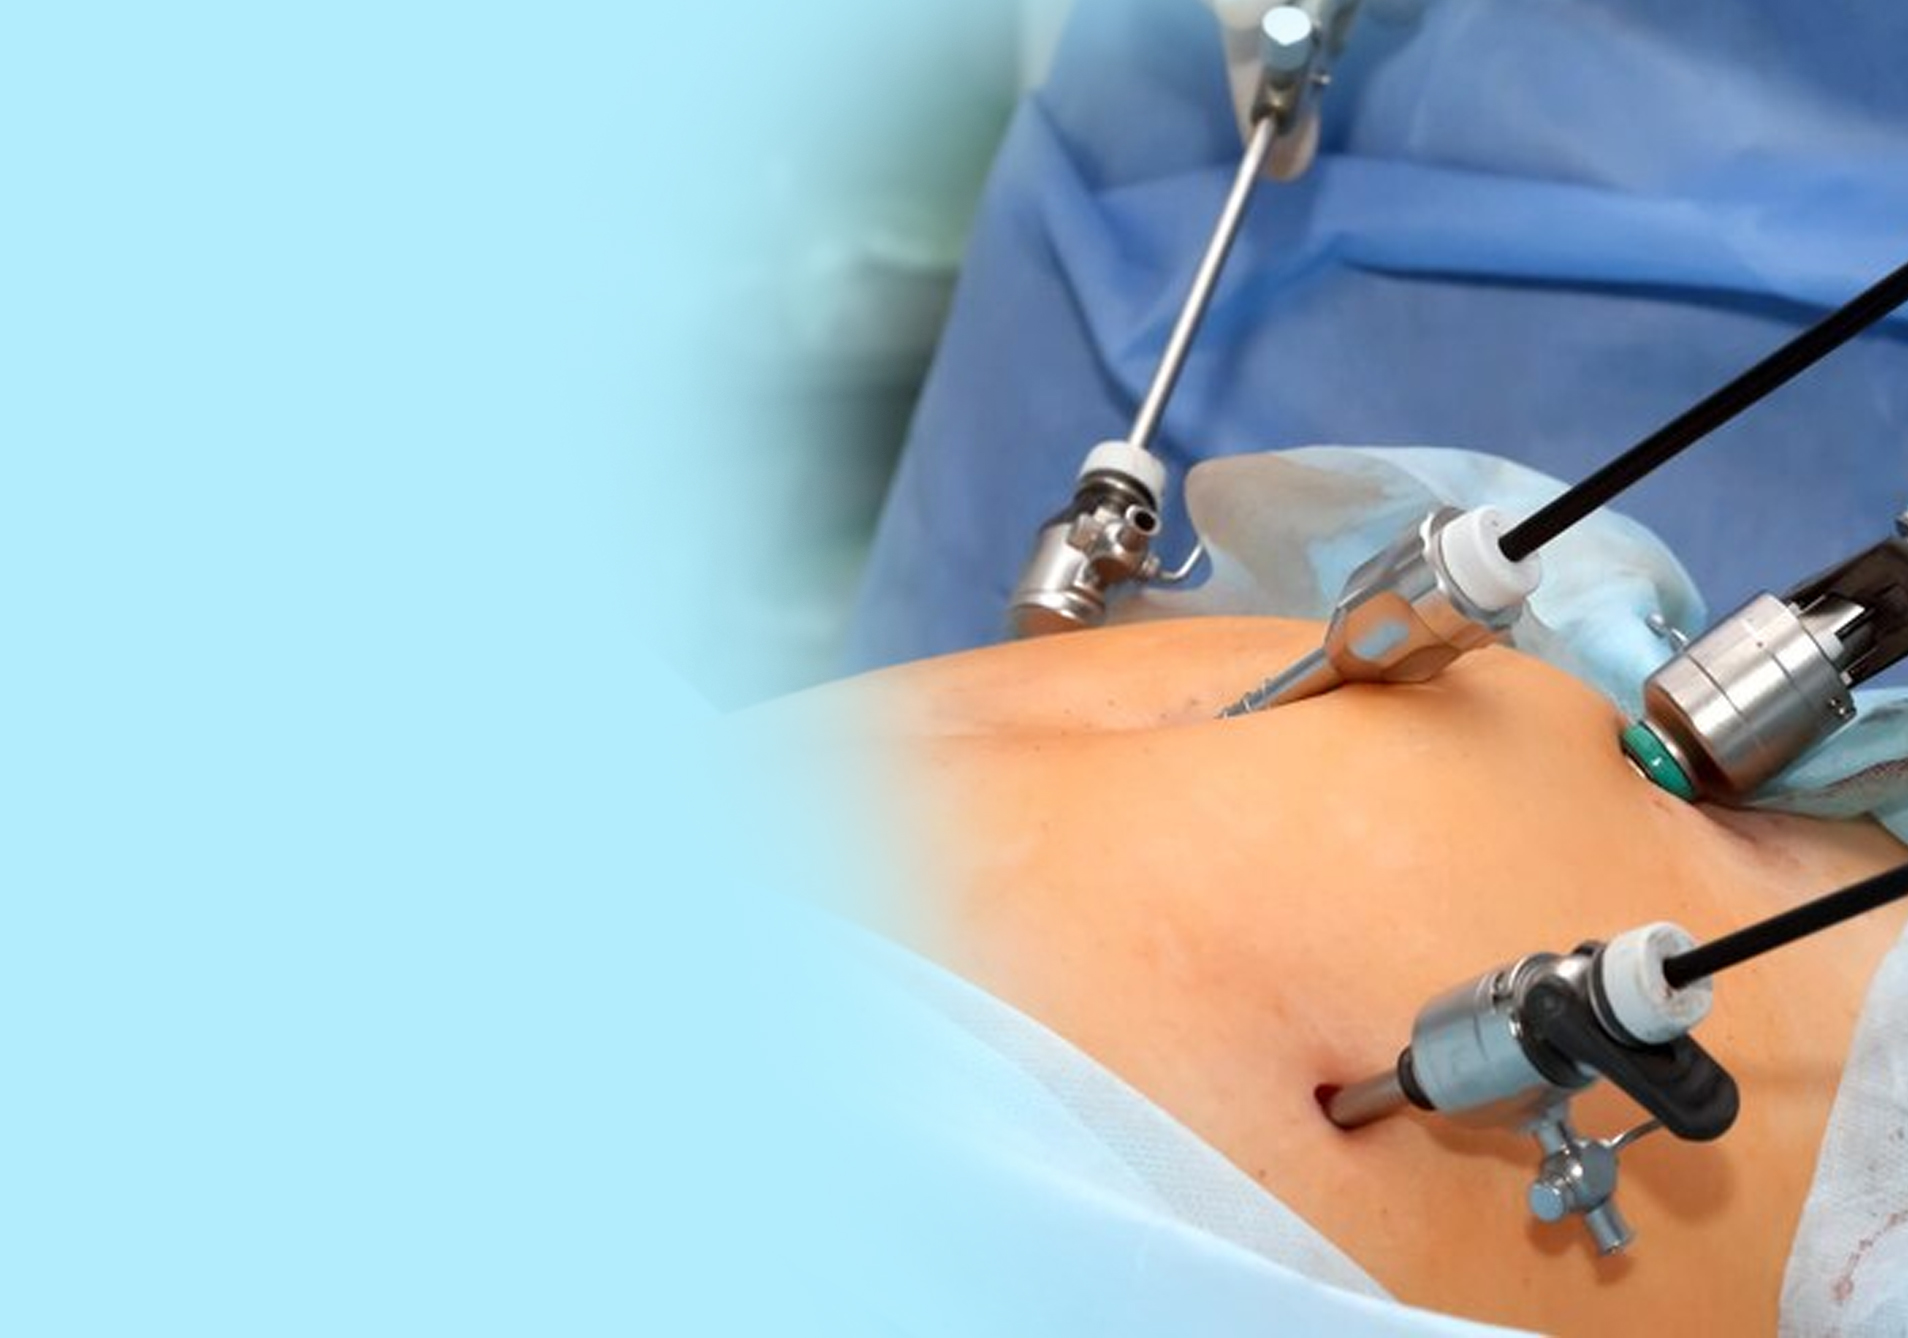 Laparoscopic Surgery: Risks, Benefits, and Recovery